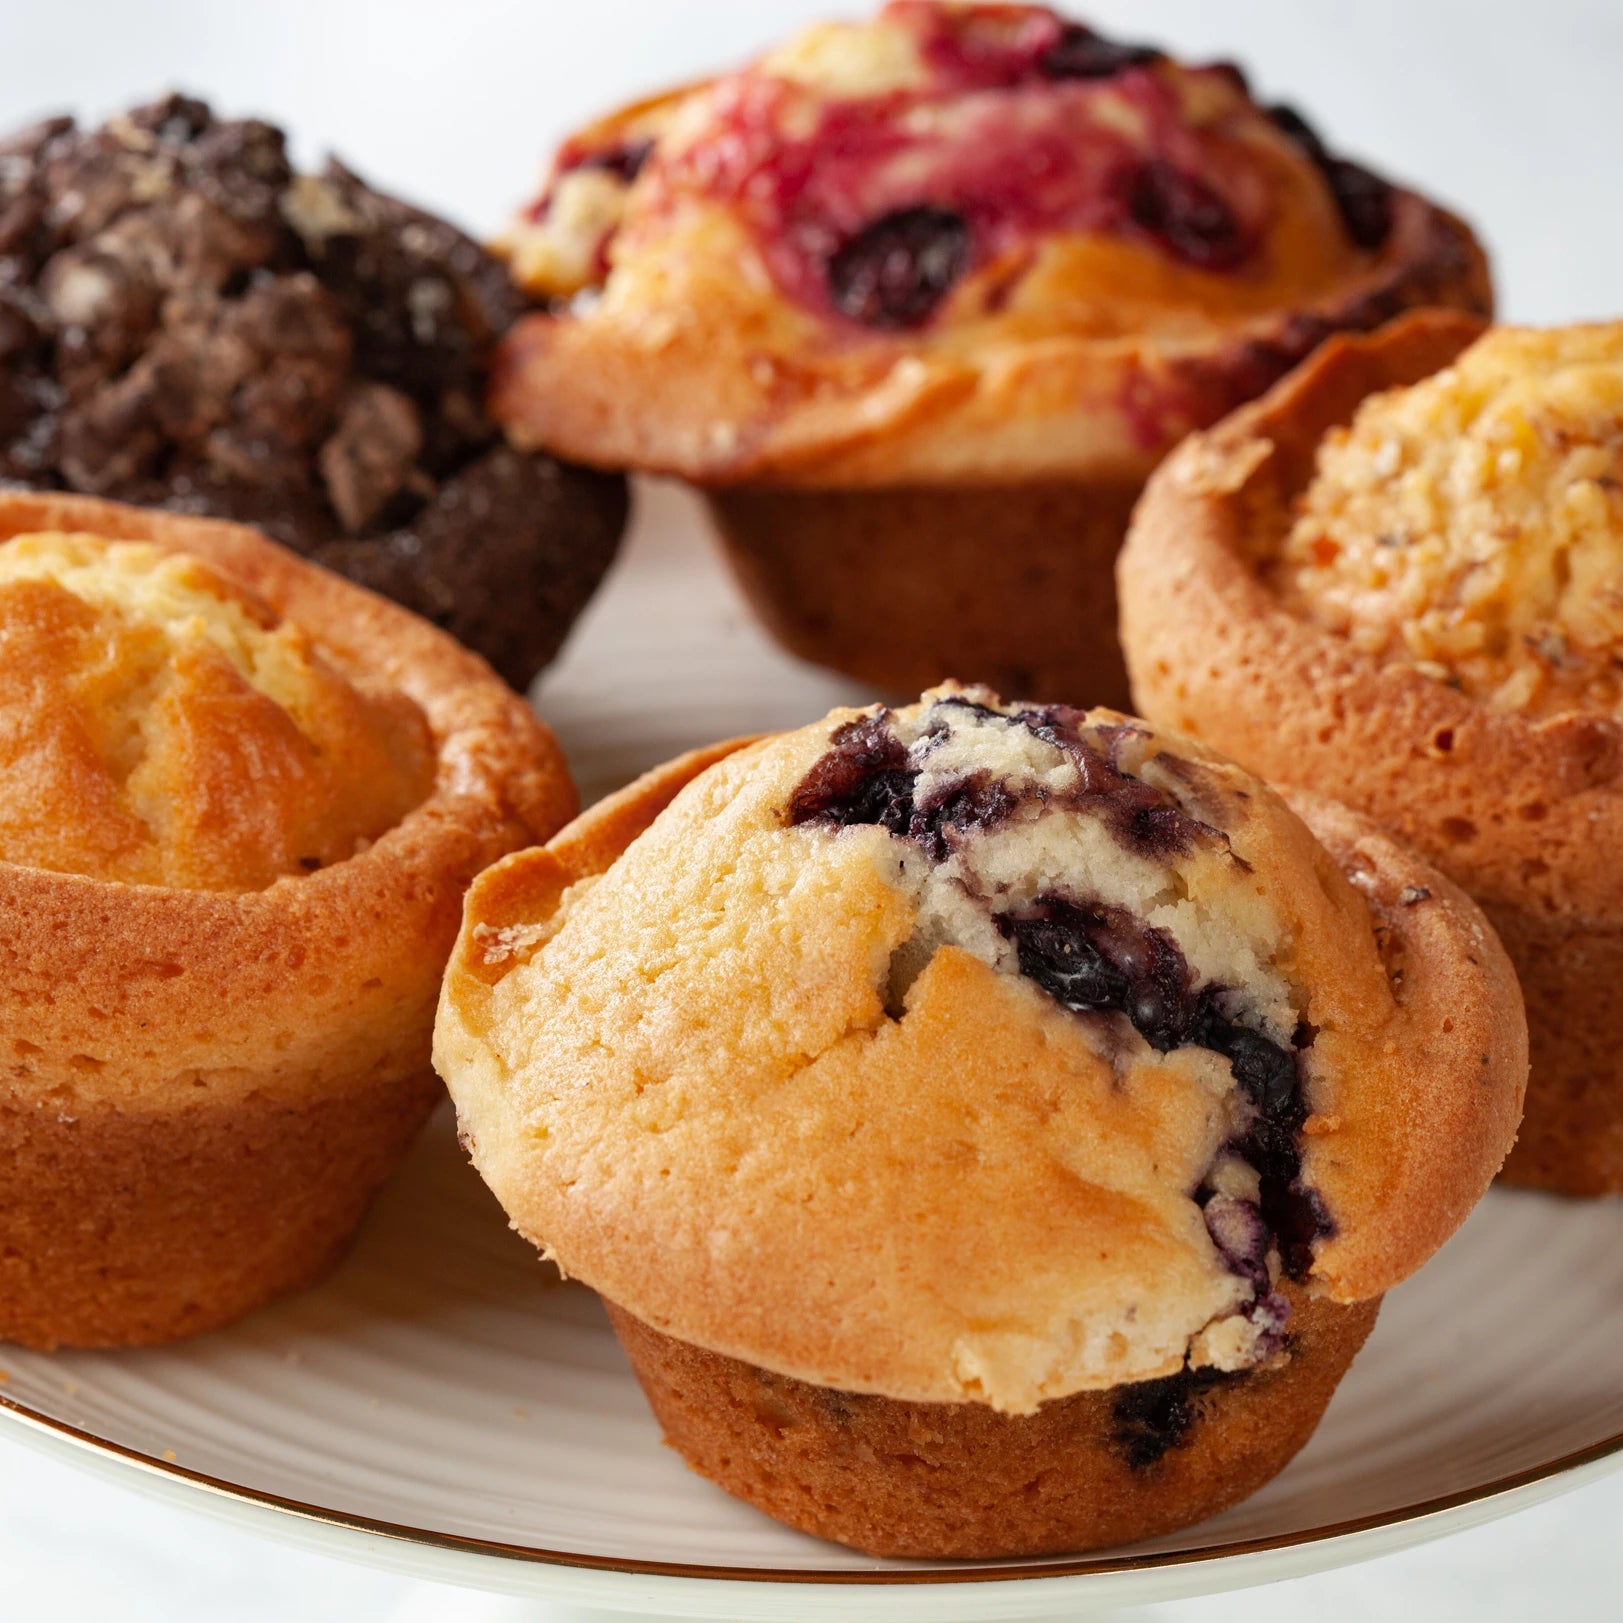 Five pastries on a white gold rimmed plate -- blueberry, cranberry, chocolate chip, corn and carrot flavors.